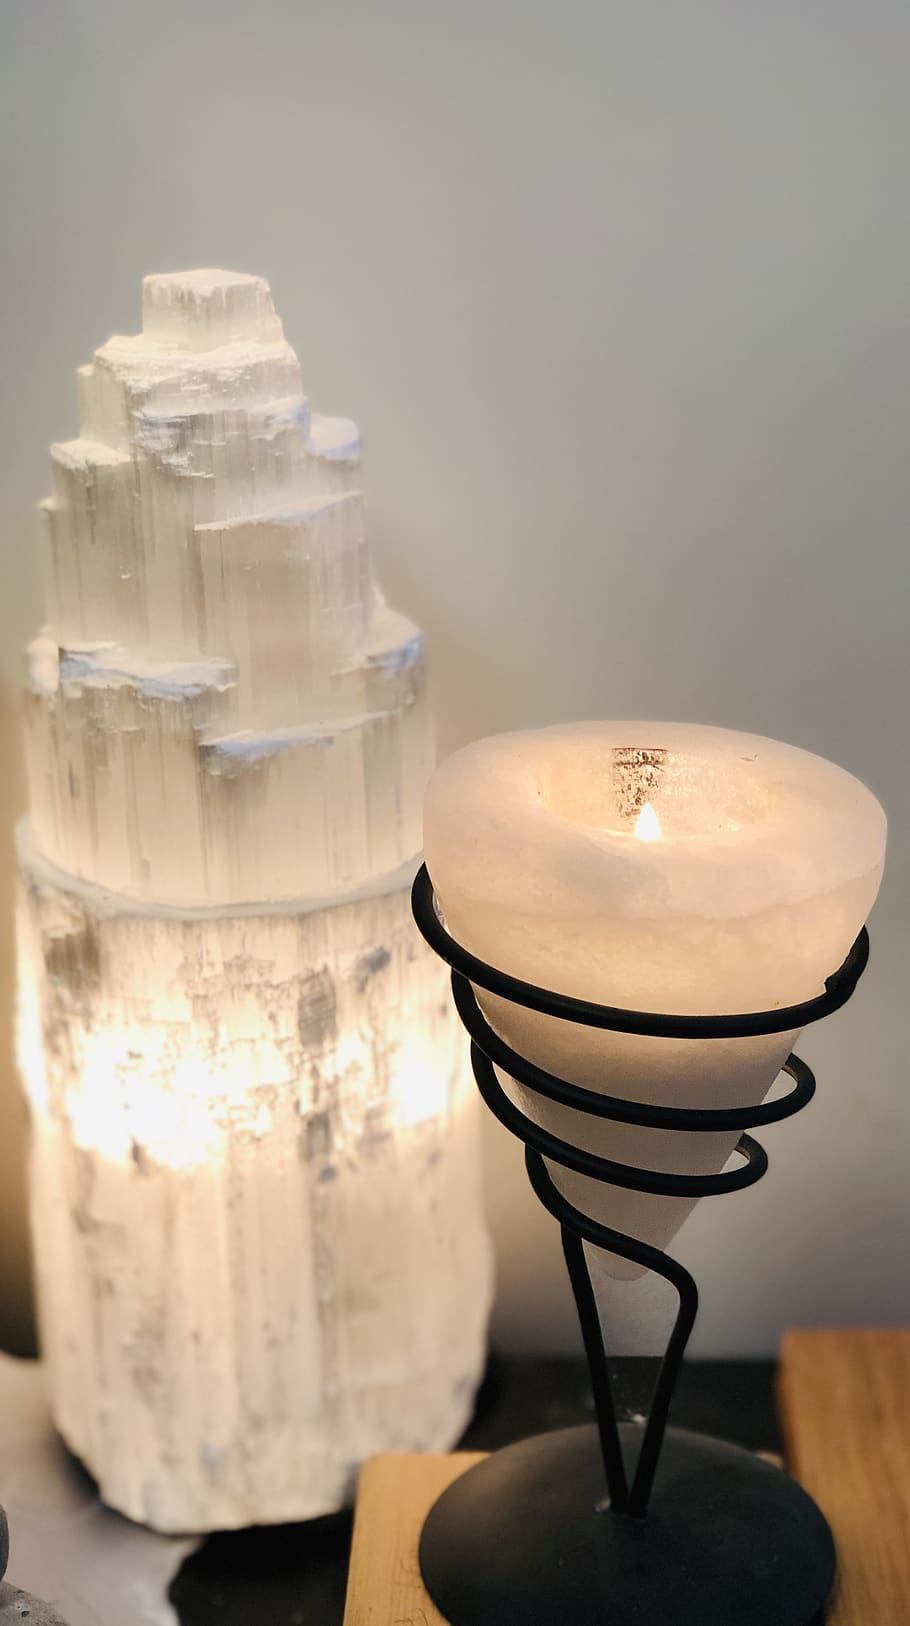 selenite lamps, selenite candle holder, selenite tower, indoors, table, lighting equipment, close-up, still life, glass - material, candle